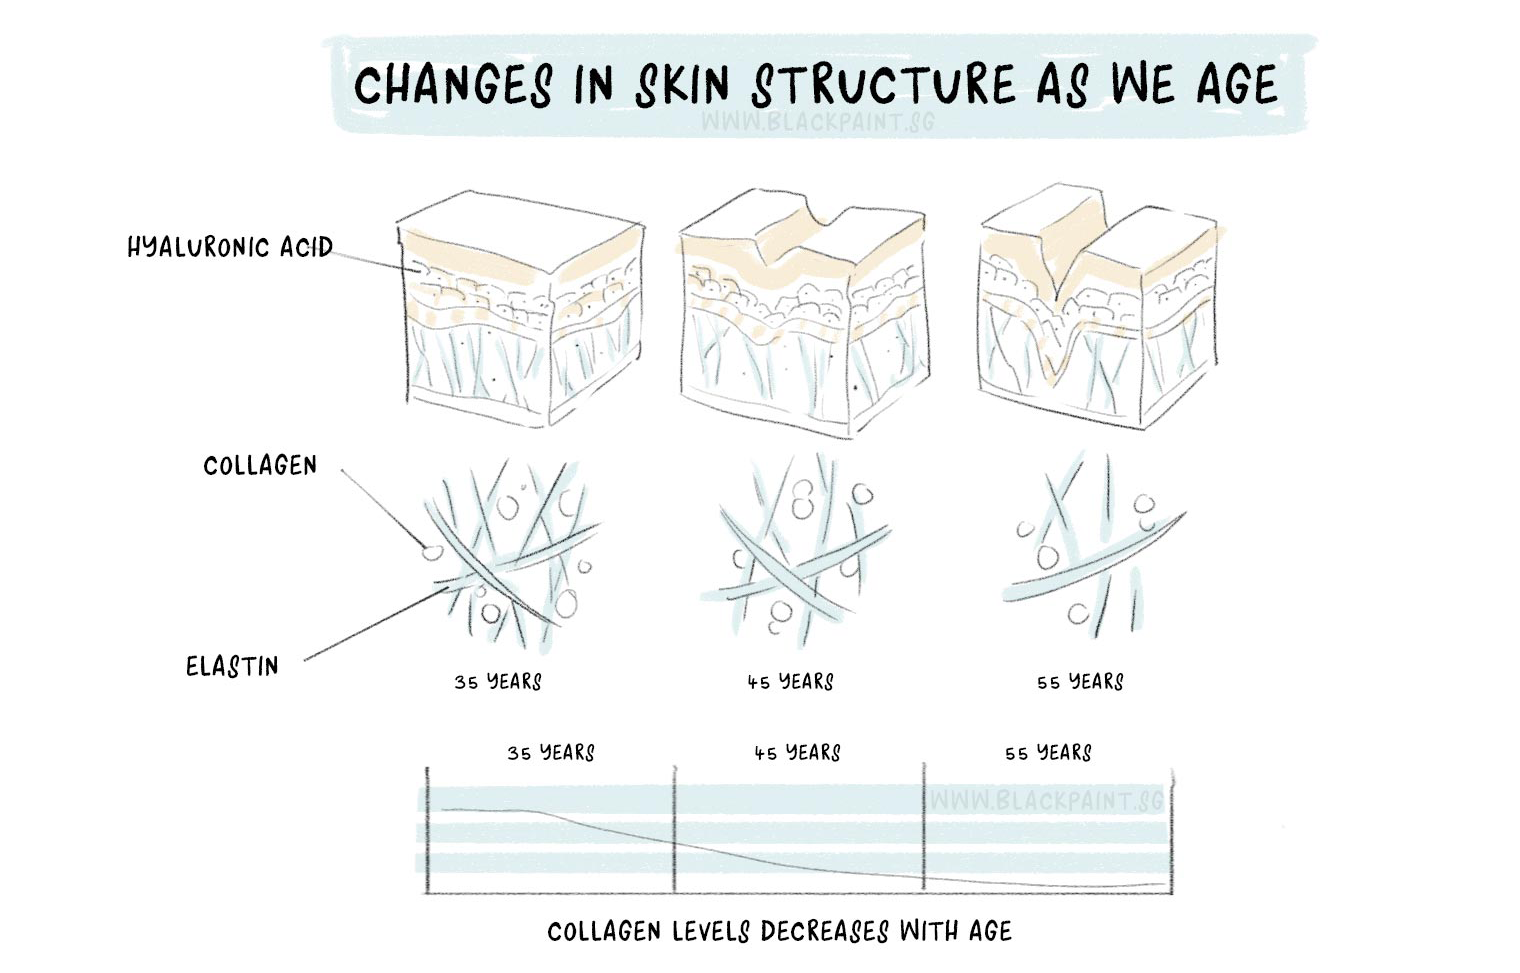 illustration of our skin changes as we age, where elasticity is reduced due to decrease in collagen content.